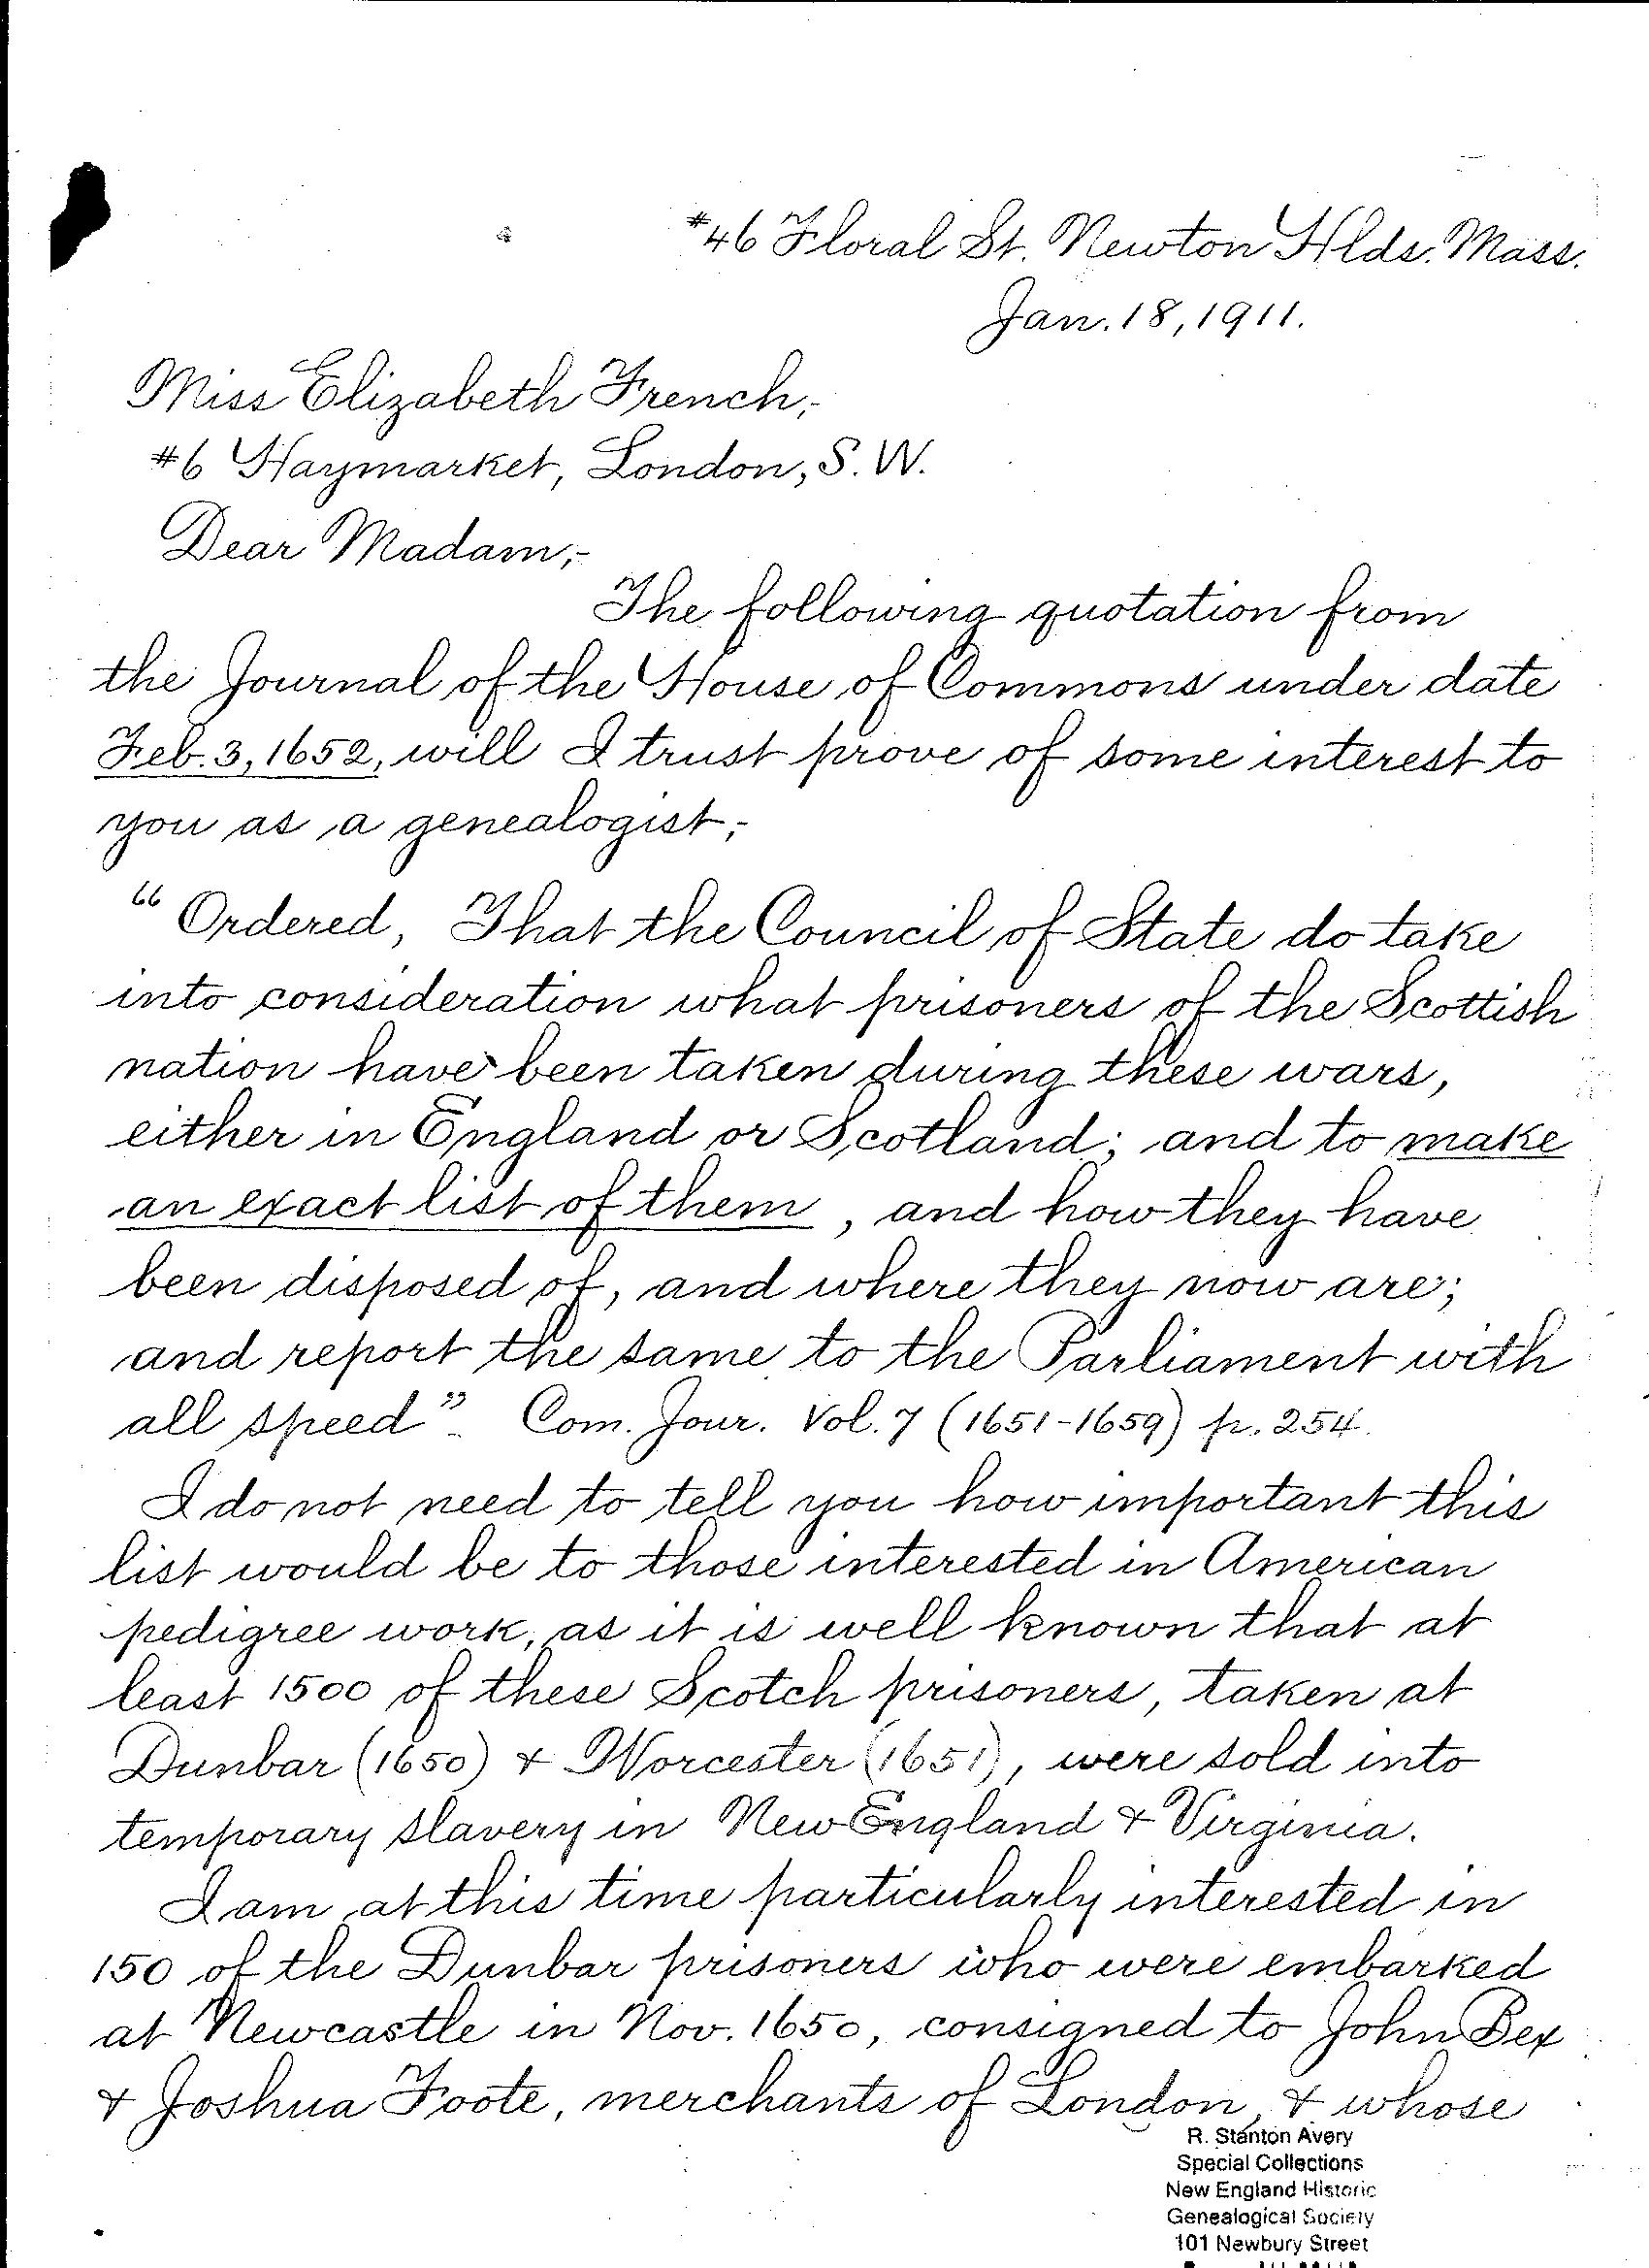 Letter from George Sawin to Elizabeth French